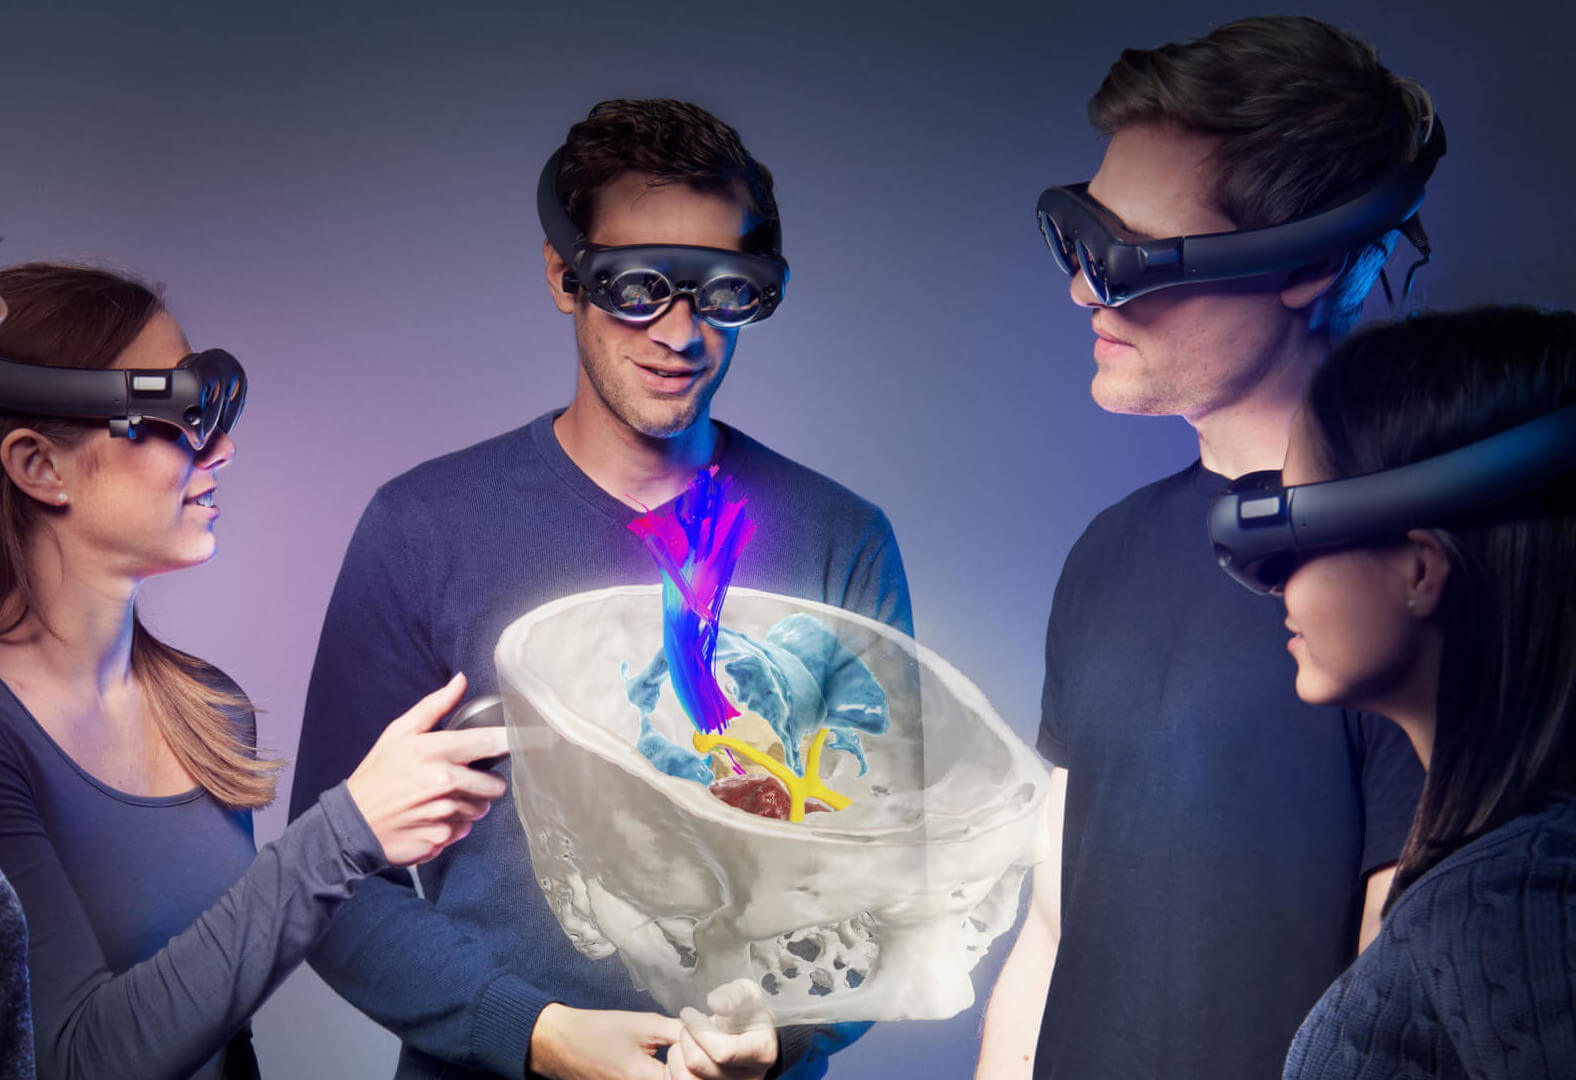 brainlab_mixed-reality-viewer-e15761613876_press_releases.jpg